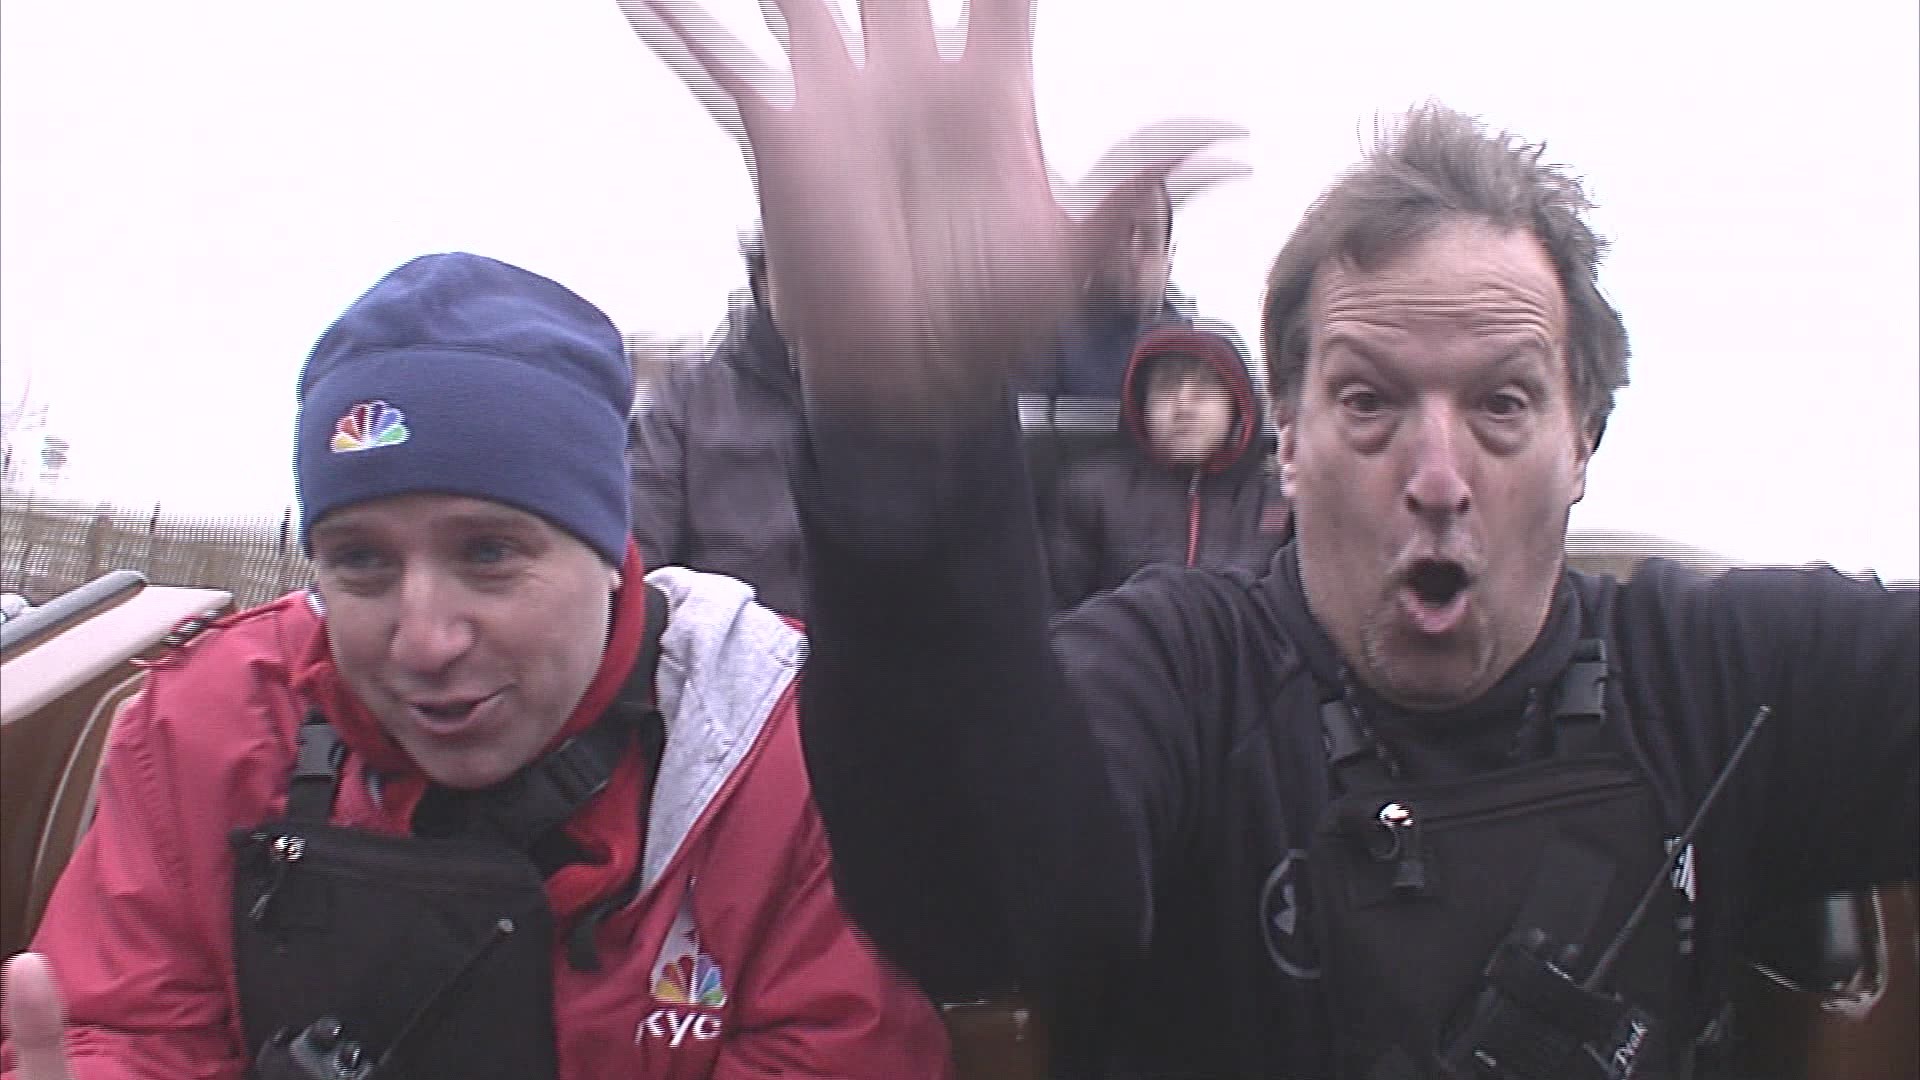 April 25, 2018: WKYC's Ryan Haidet and Tim Coffey go for a ride on Cedar Point's Steel Vengeance -- their latest record-breaking roller coaster.